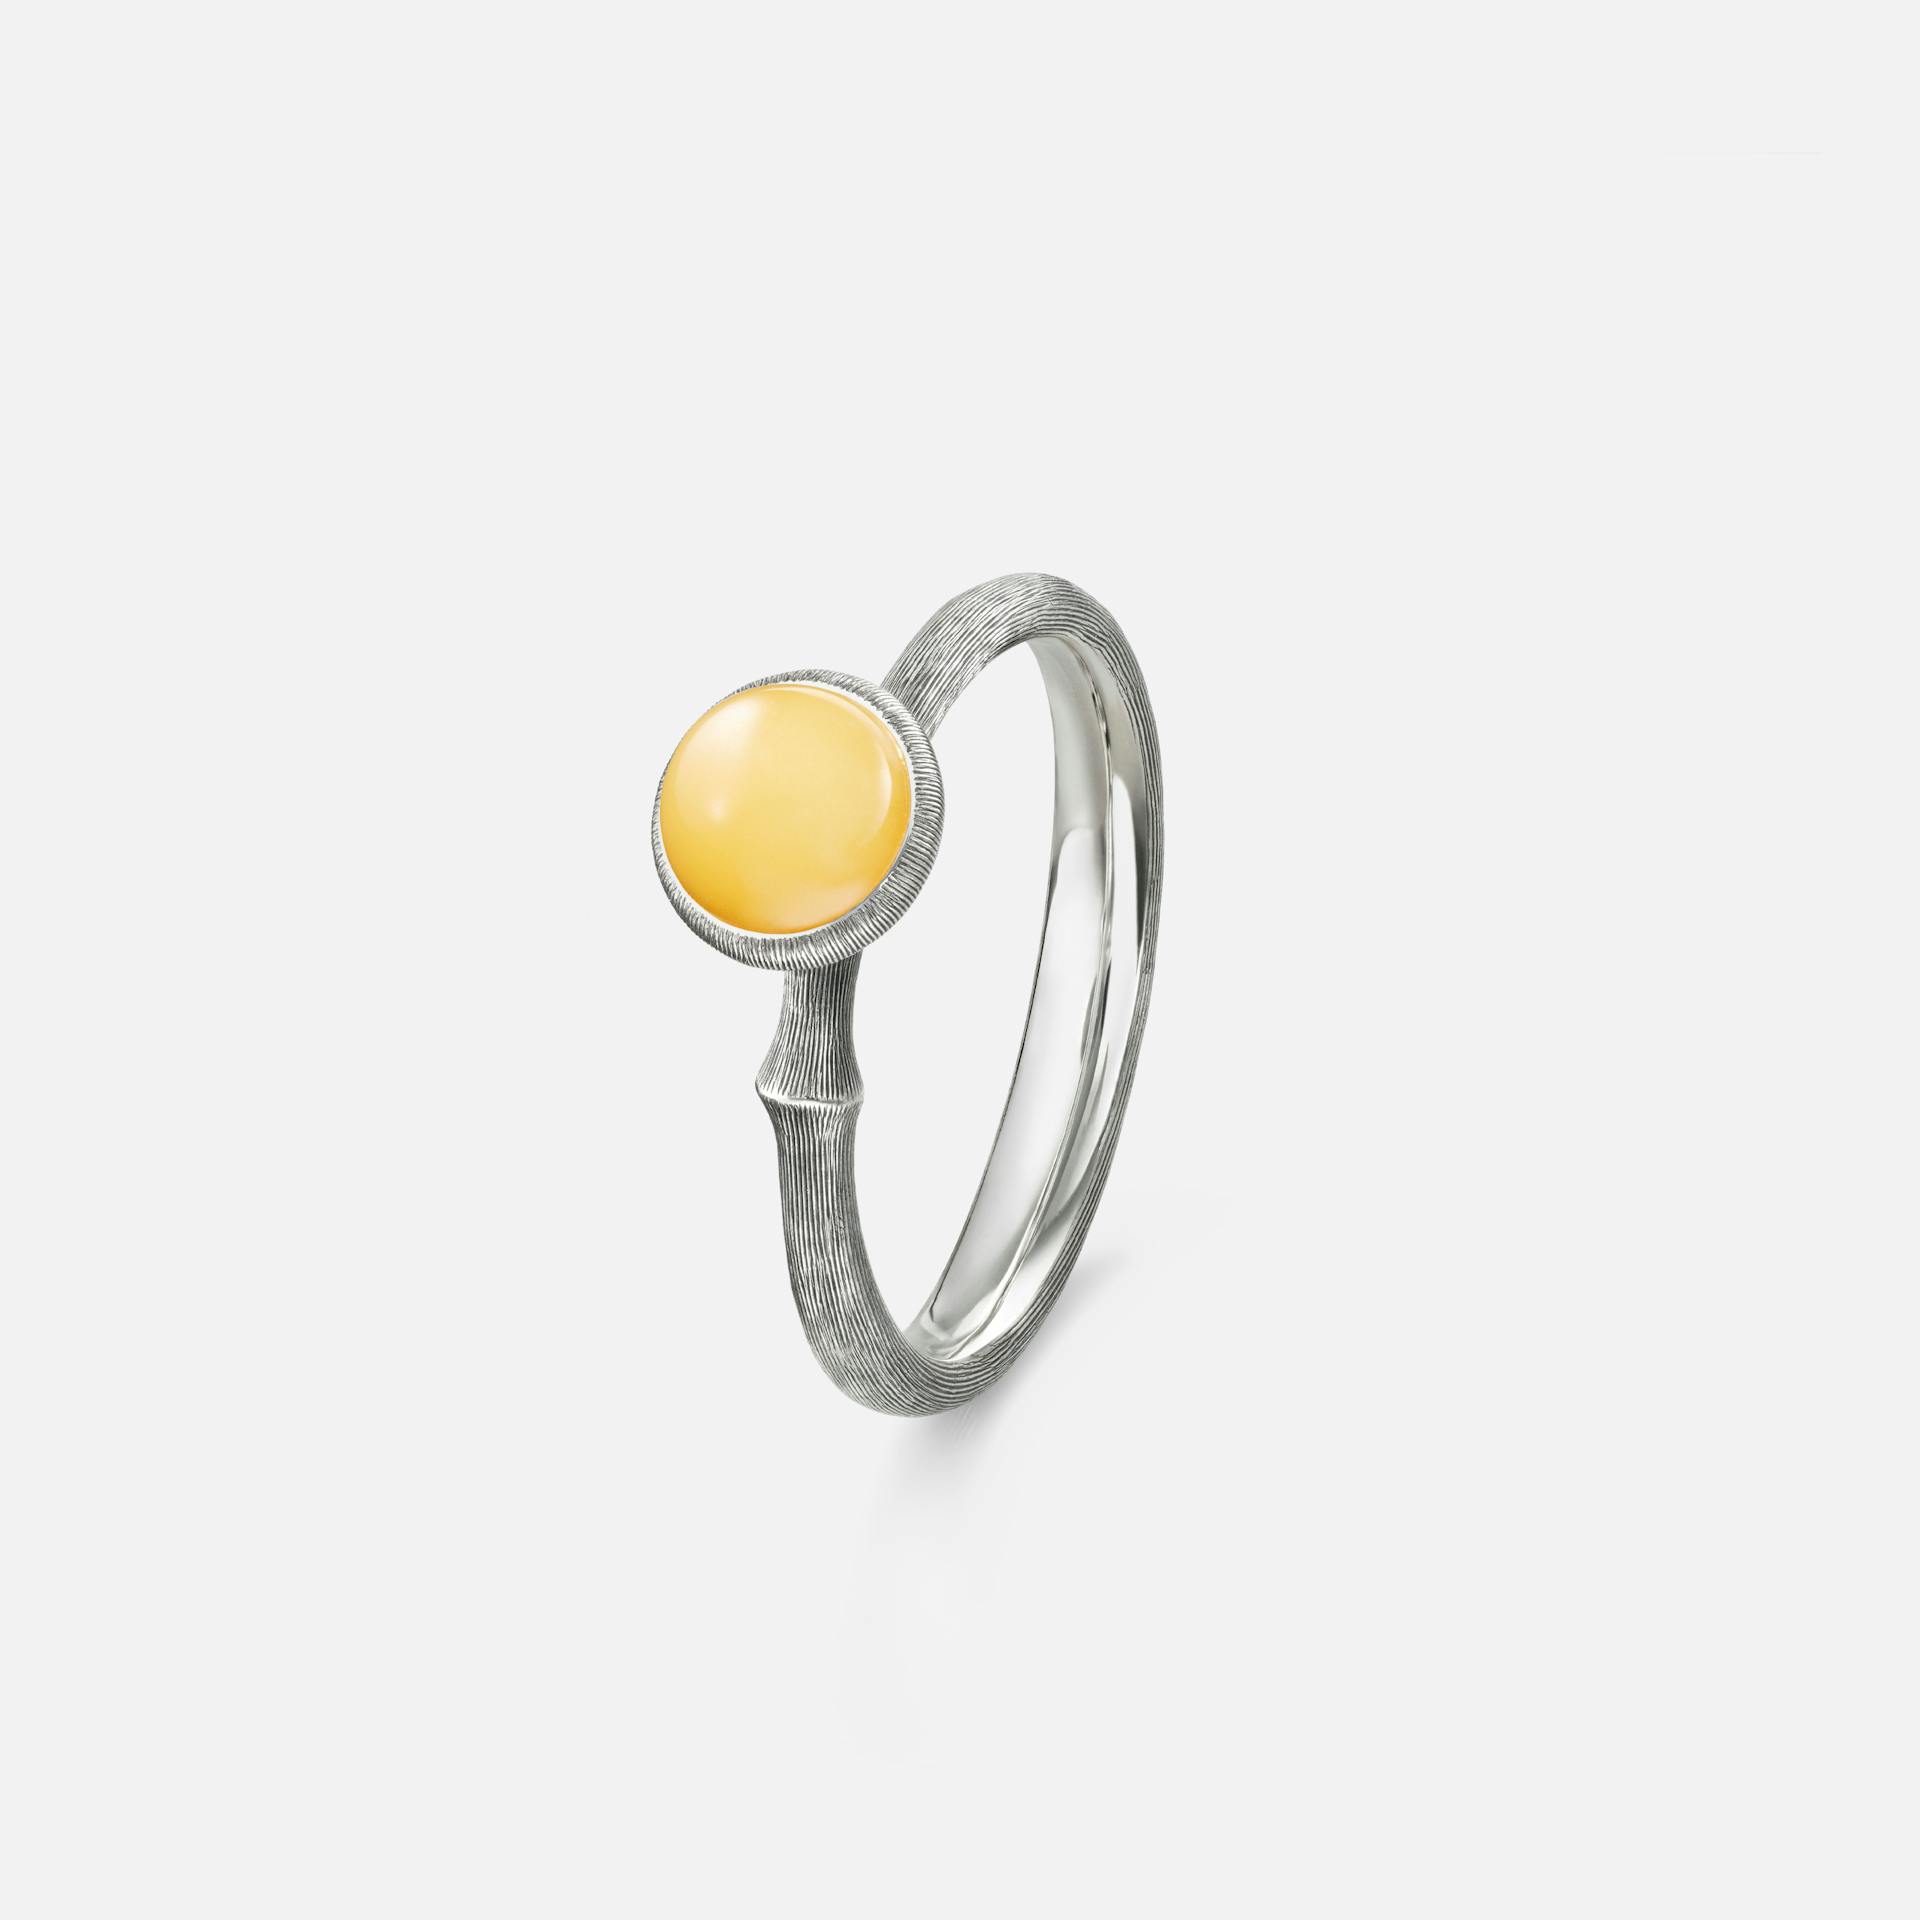 Lotus Ring size 0 in Oxidized Sterling Silver with Amber  |  Ole Lynggaard Copenhagen